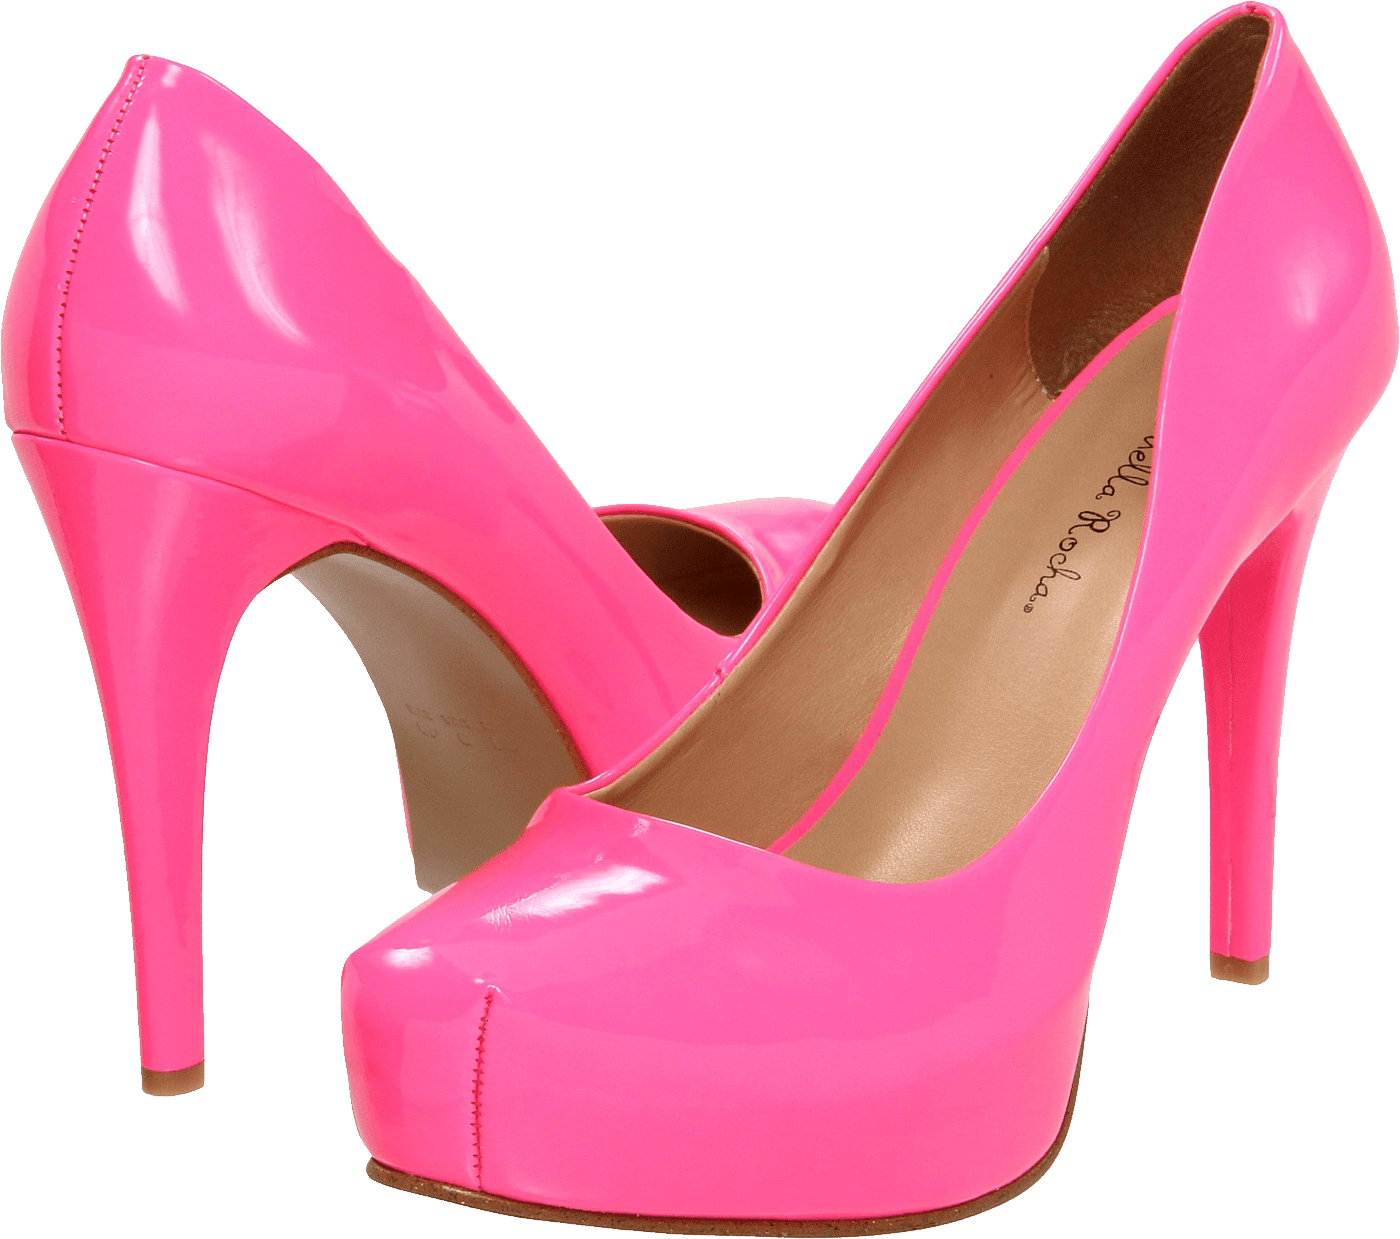 Shoes PNG Image